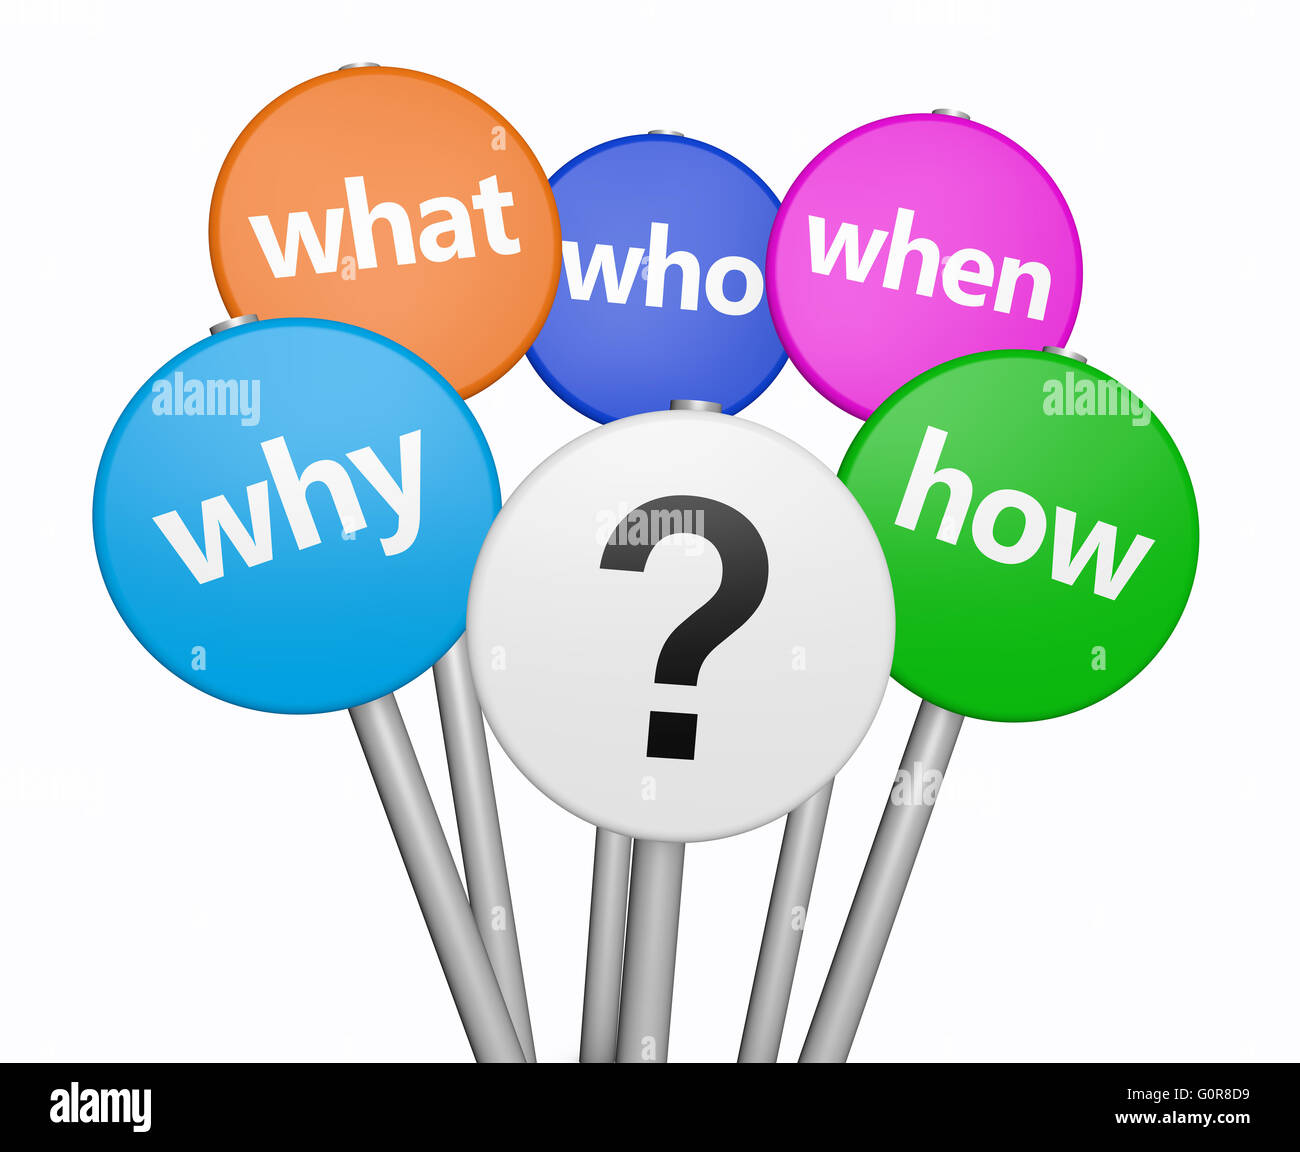 Business and customers questions concept with question mark symbol and questions words on colorful sign isolated on white. Stock Photo